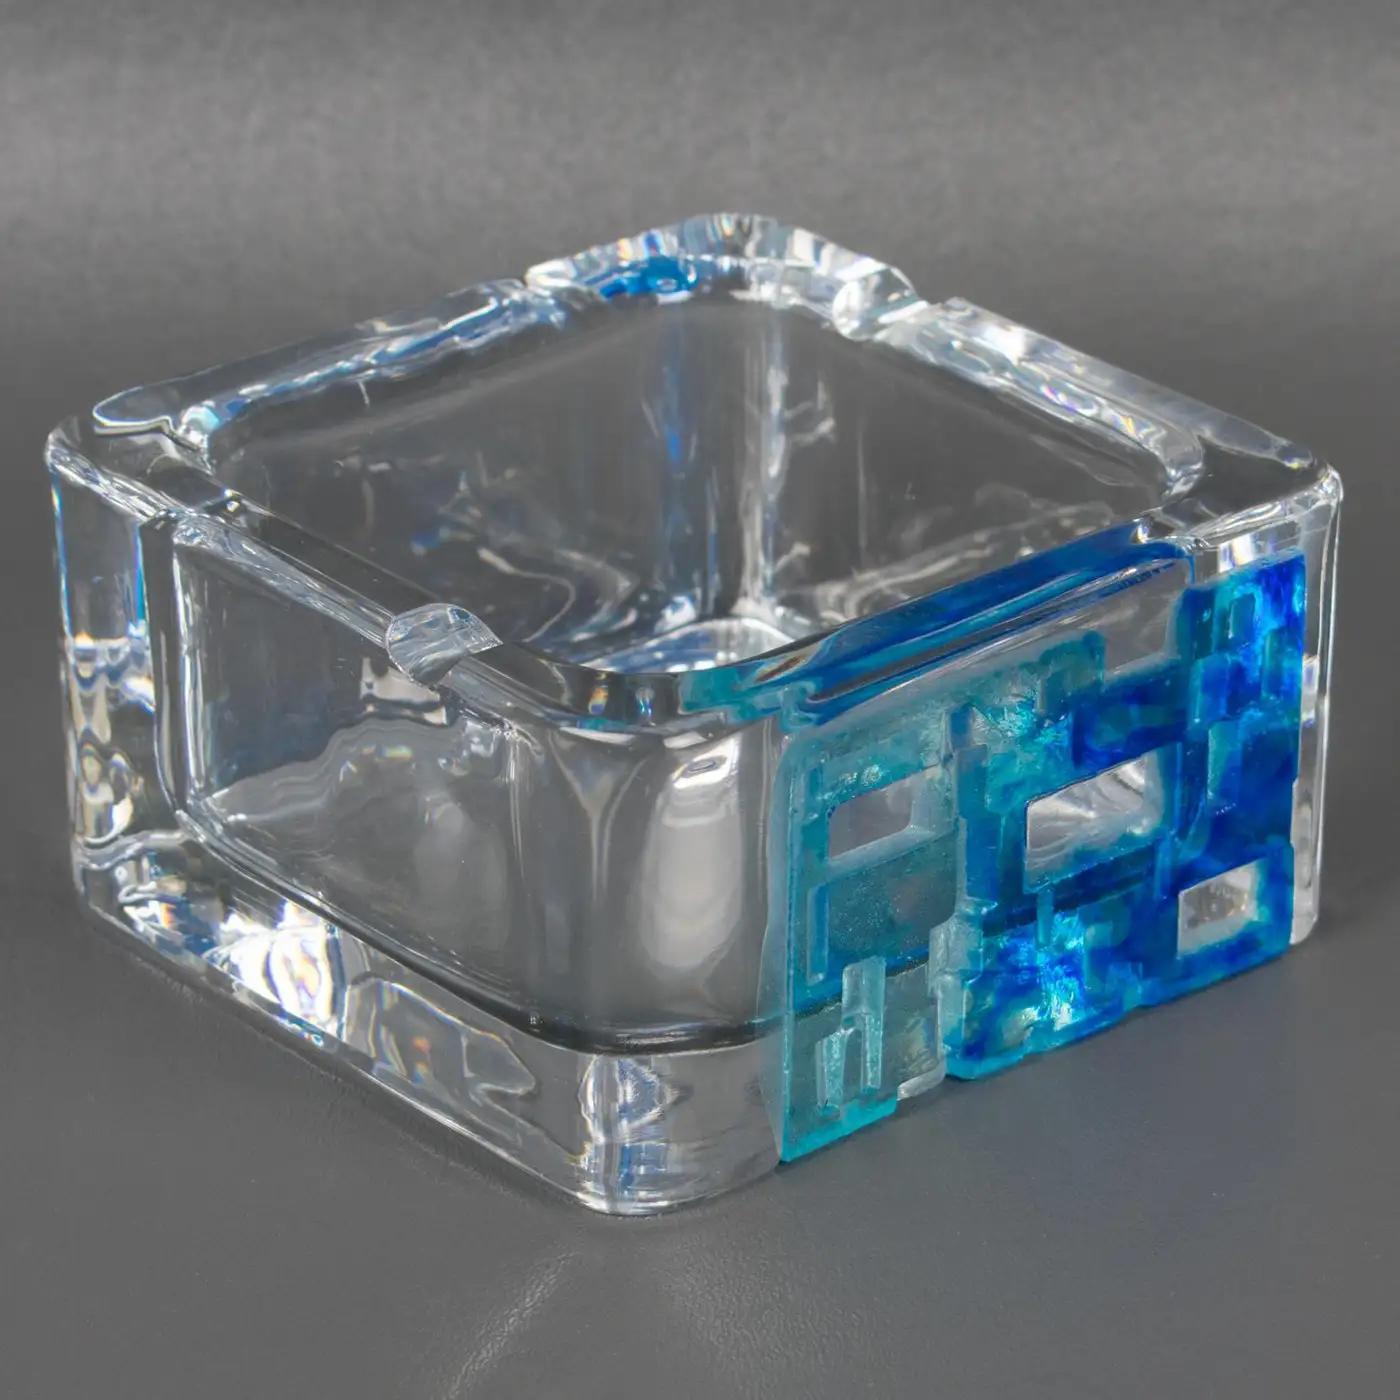 Daum France designed this lovely crystal ashtray, catchall, or decorative bowl in the 1970s. The mouth-blown transparent crystal design has a heavy square shape with blue and turquoise modernist pate de verre inlay. The desk tidy is marked on the